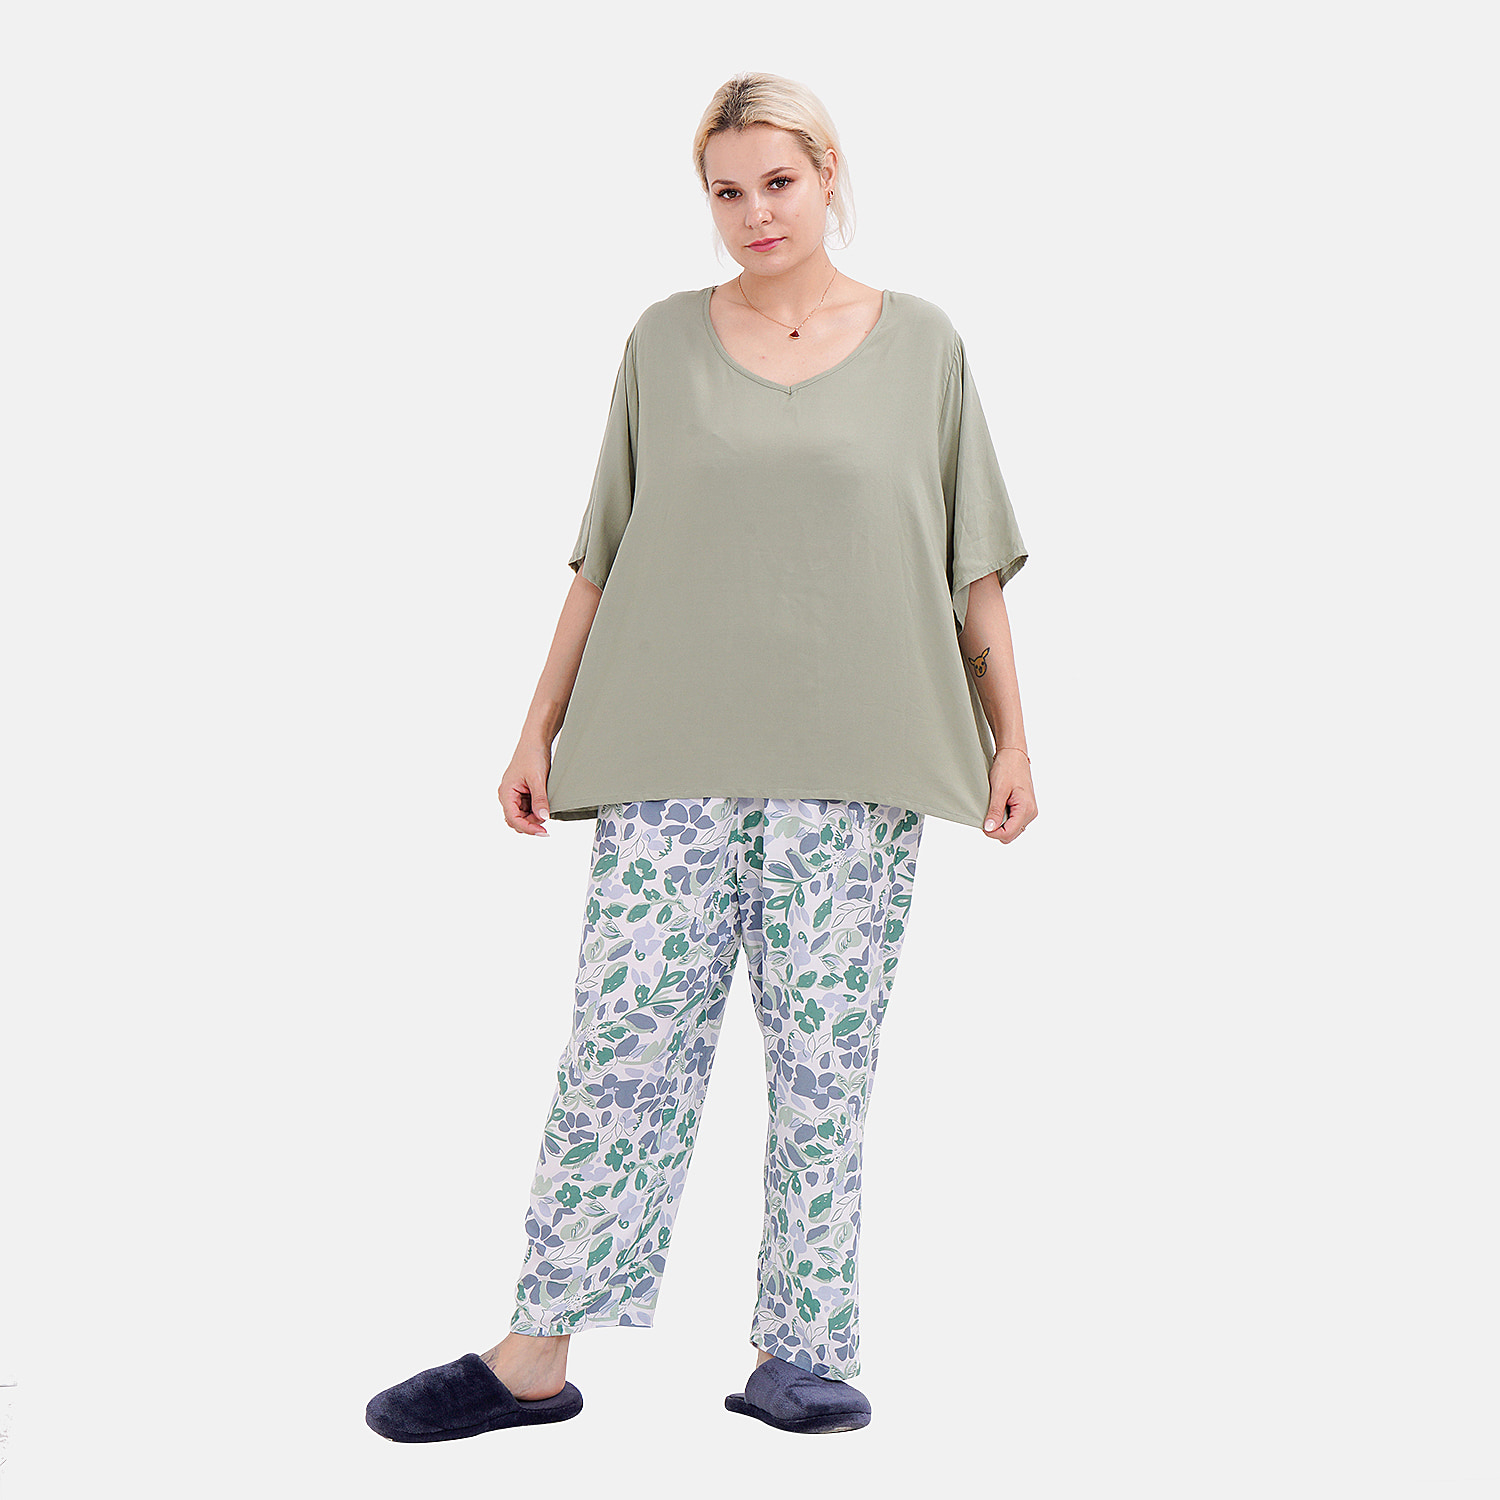 LA MAREY Loungewear Sets (Short Sleeves Top with Printed Trousers)  - Green (Size M)